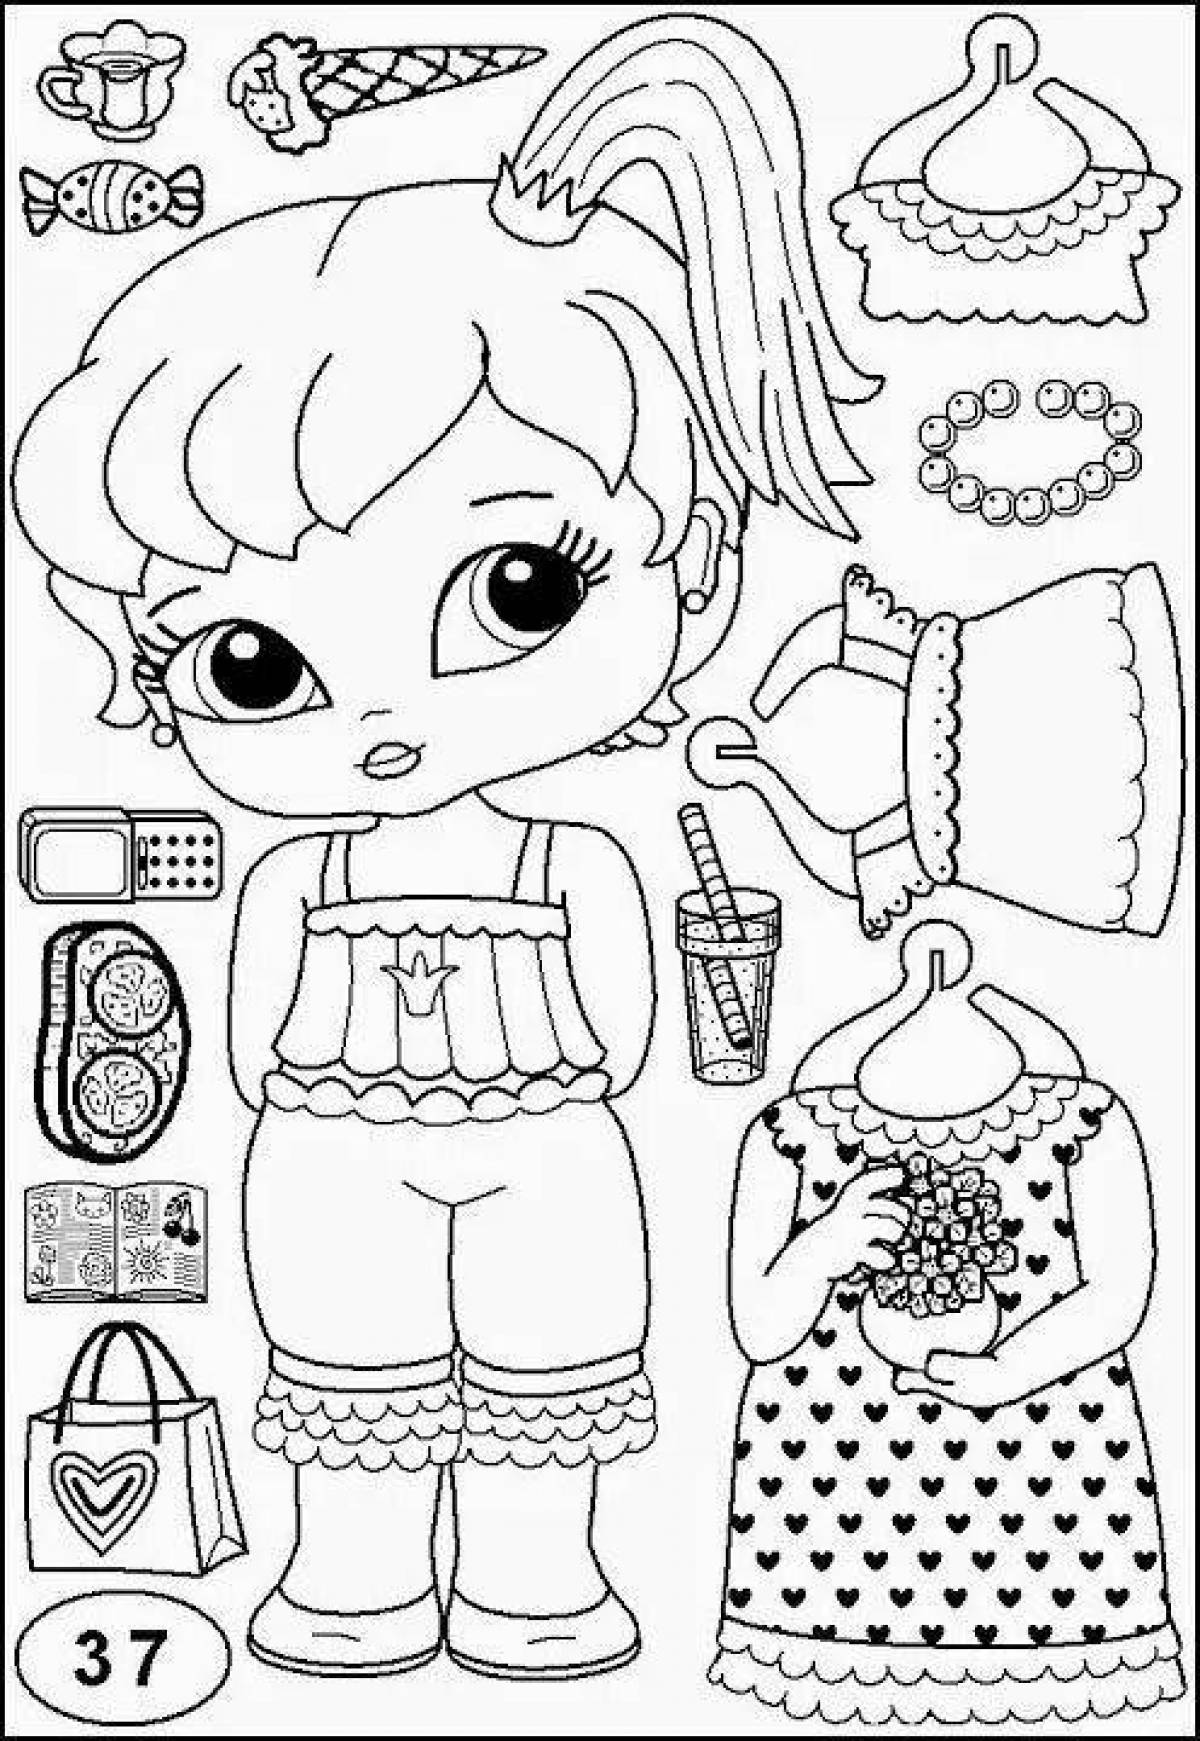 Explosion coloring lol doll with paper cutting clothes